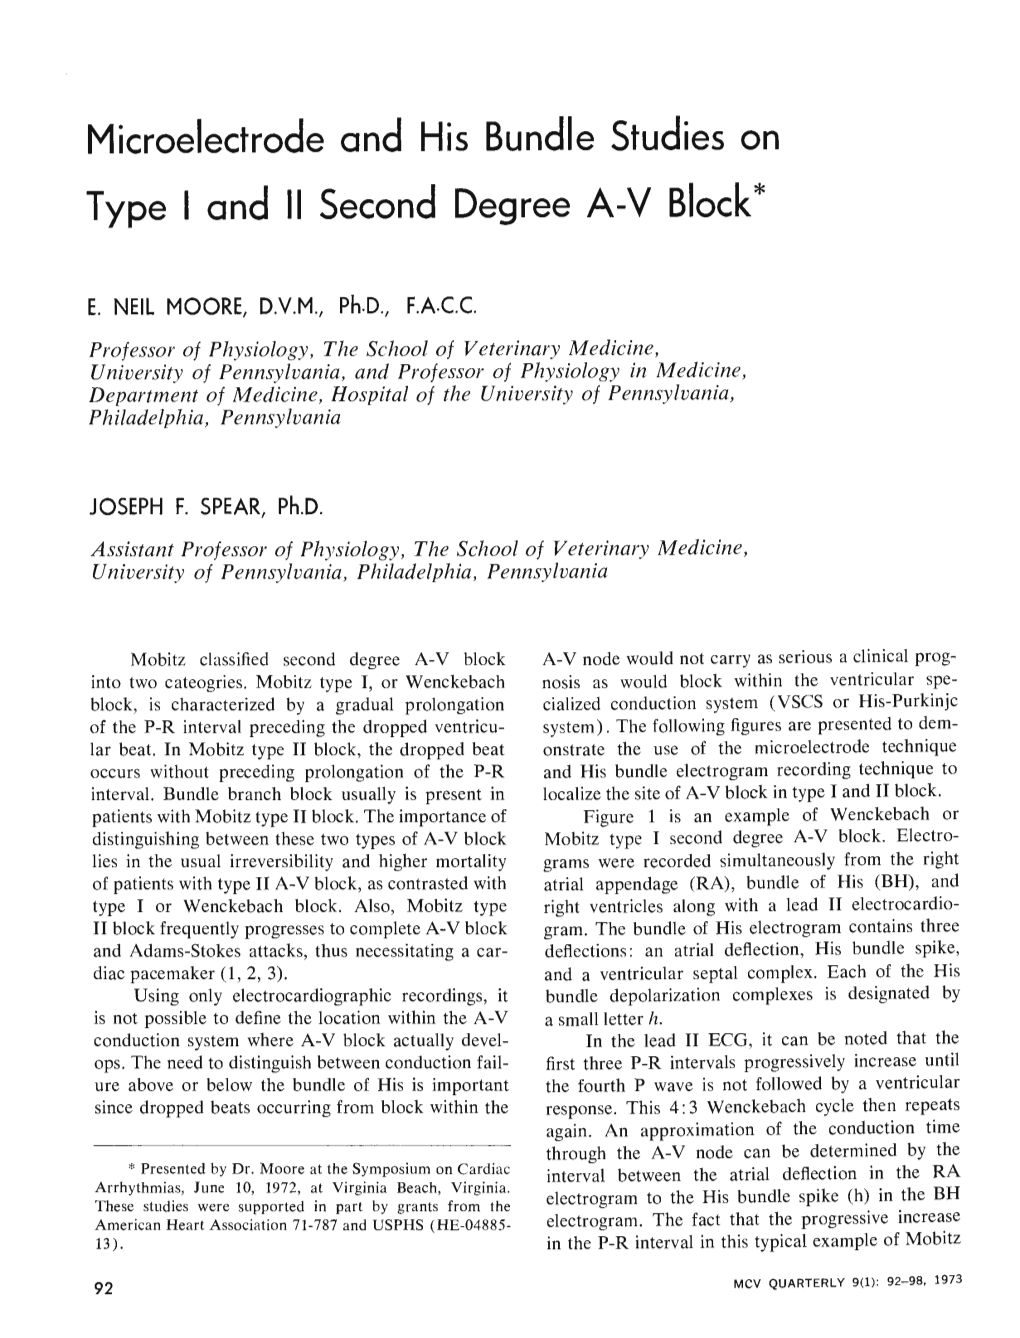 Microelectrode and His Bundle Studies on Type I and II Second Degree A-V Block*